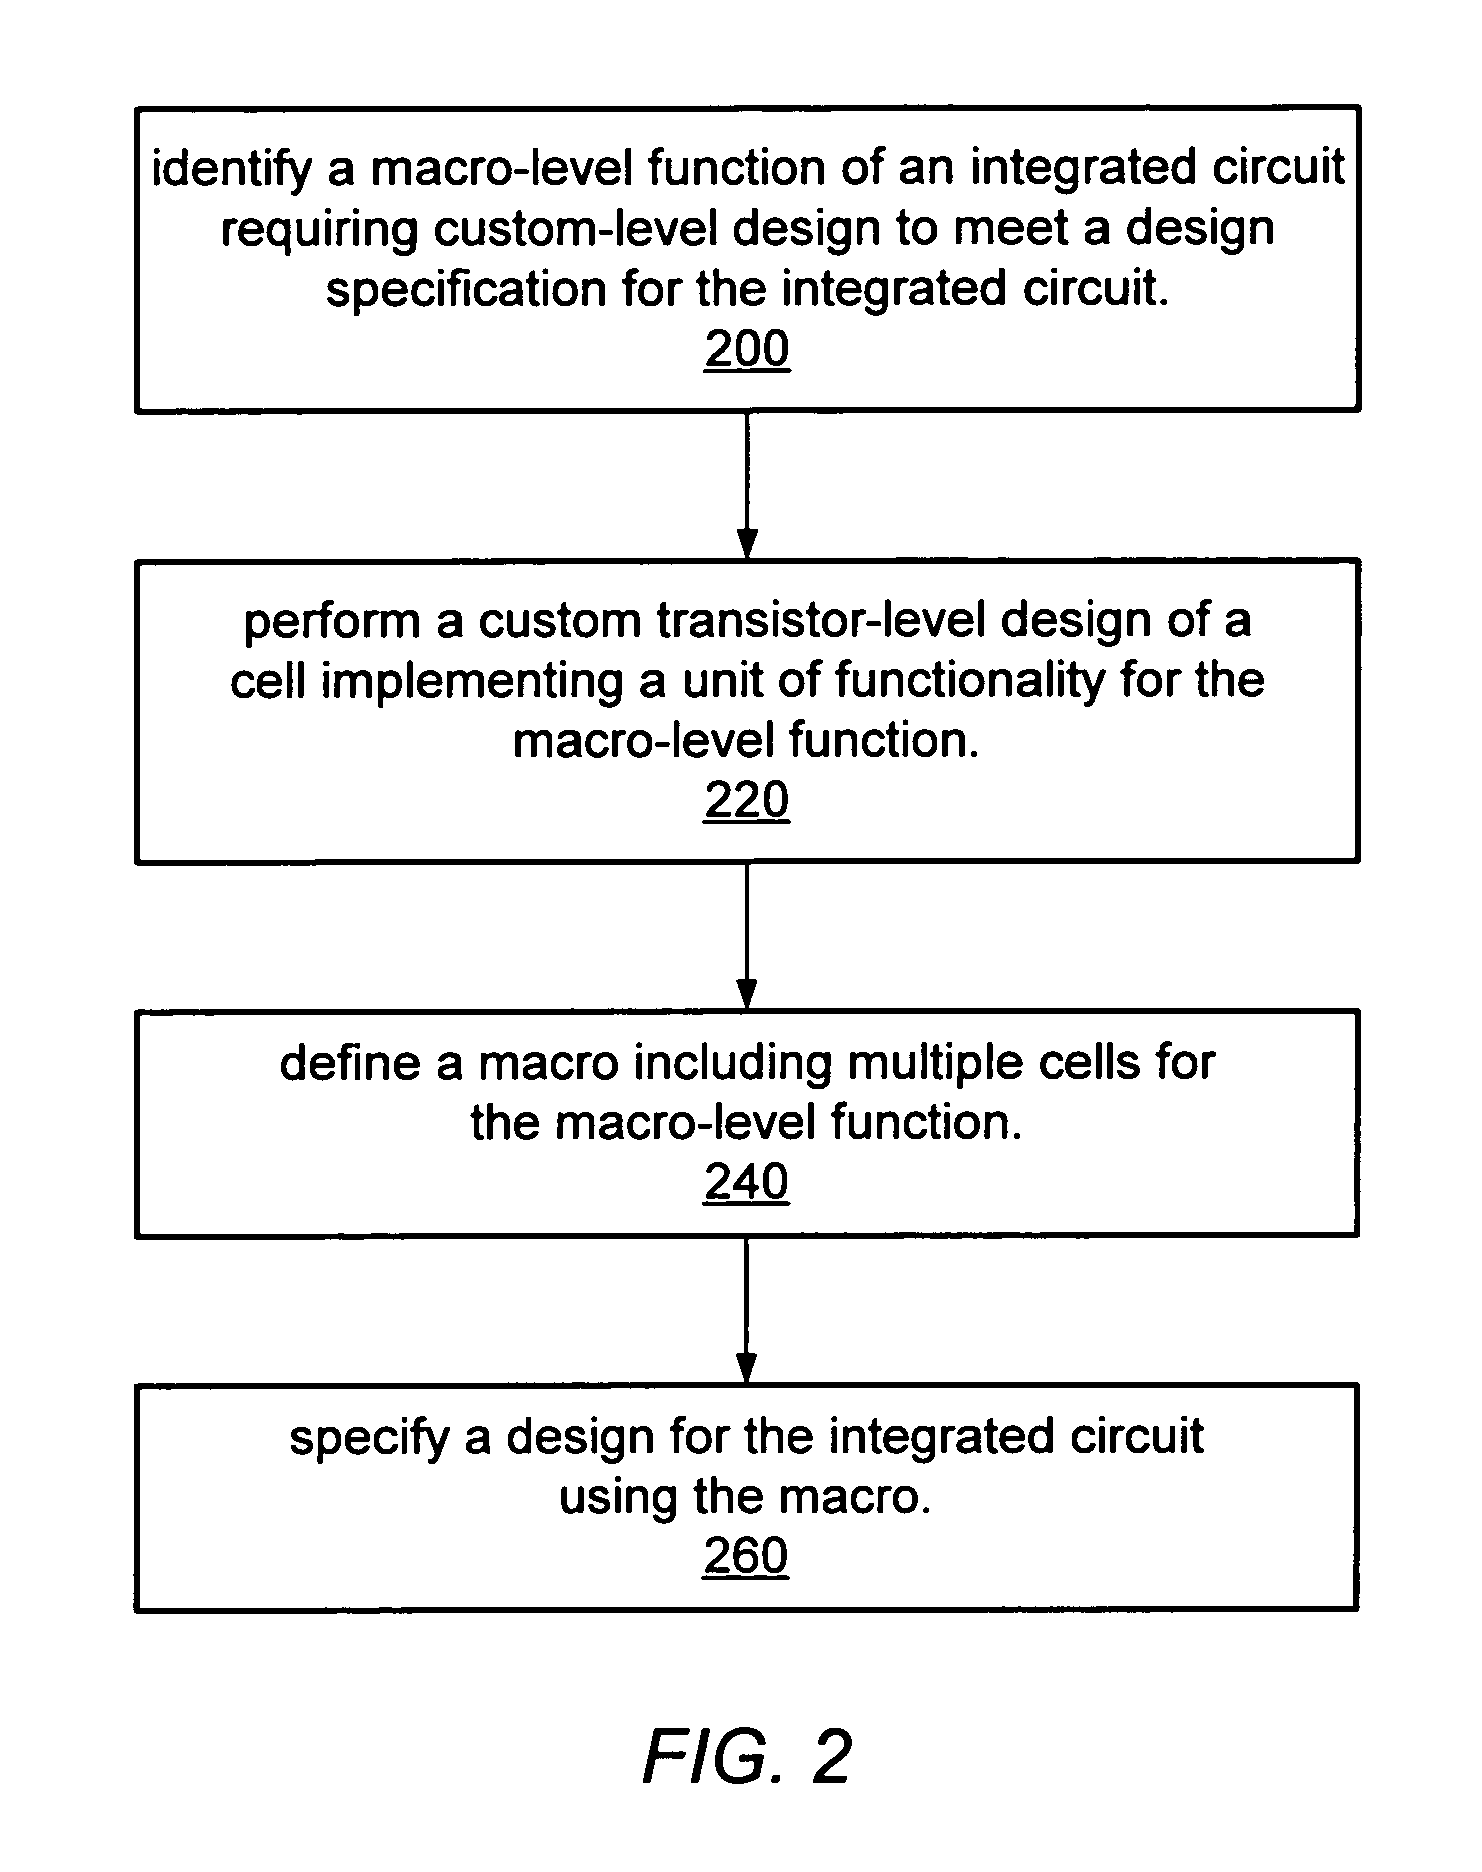 Integrated circuit design with cell-based macros